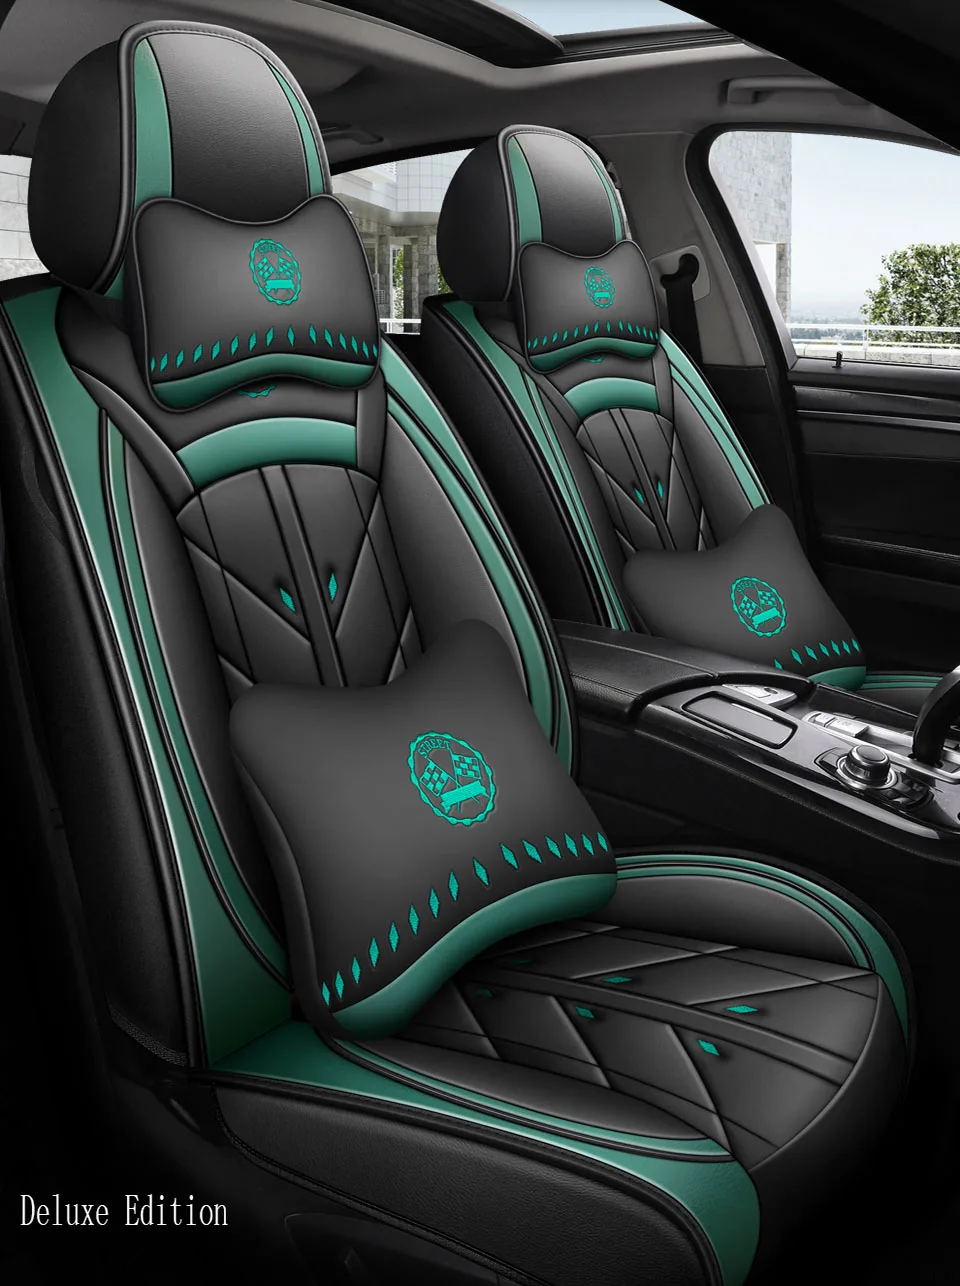 

Car Universal Seat Cover Breathable PU Leather for Cadillac CTS Escalade ATS CT6 DeVille XTS SRX XT5 CTS-V STS DTS SLS XLR Auto